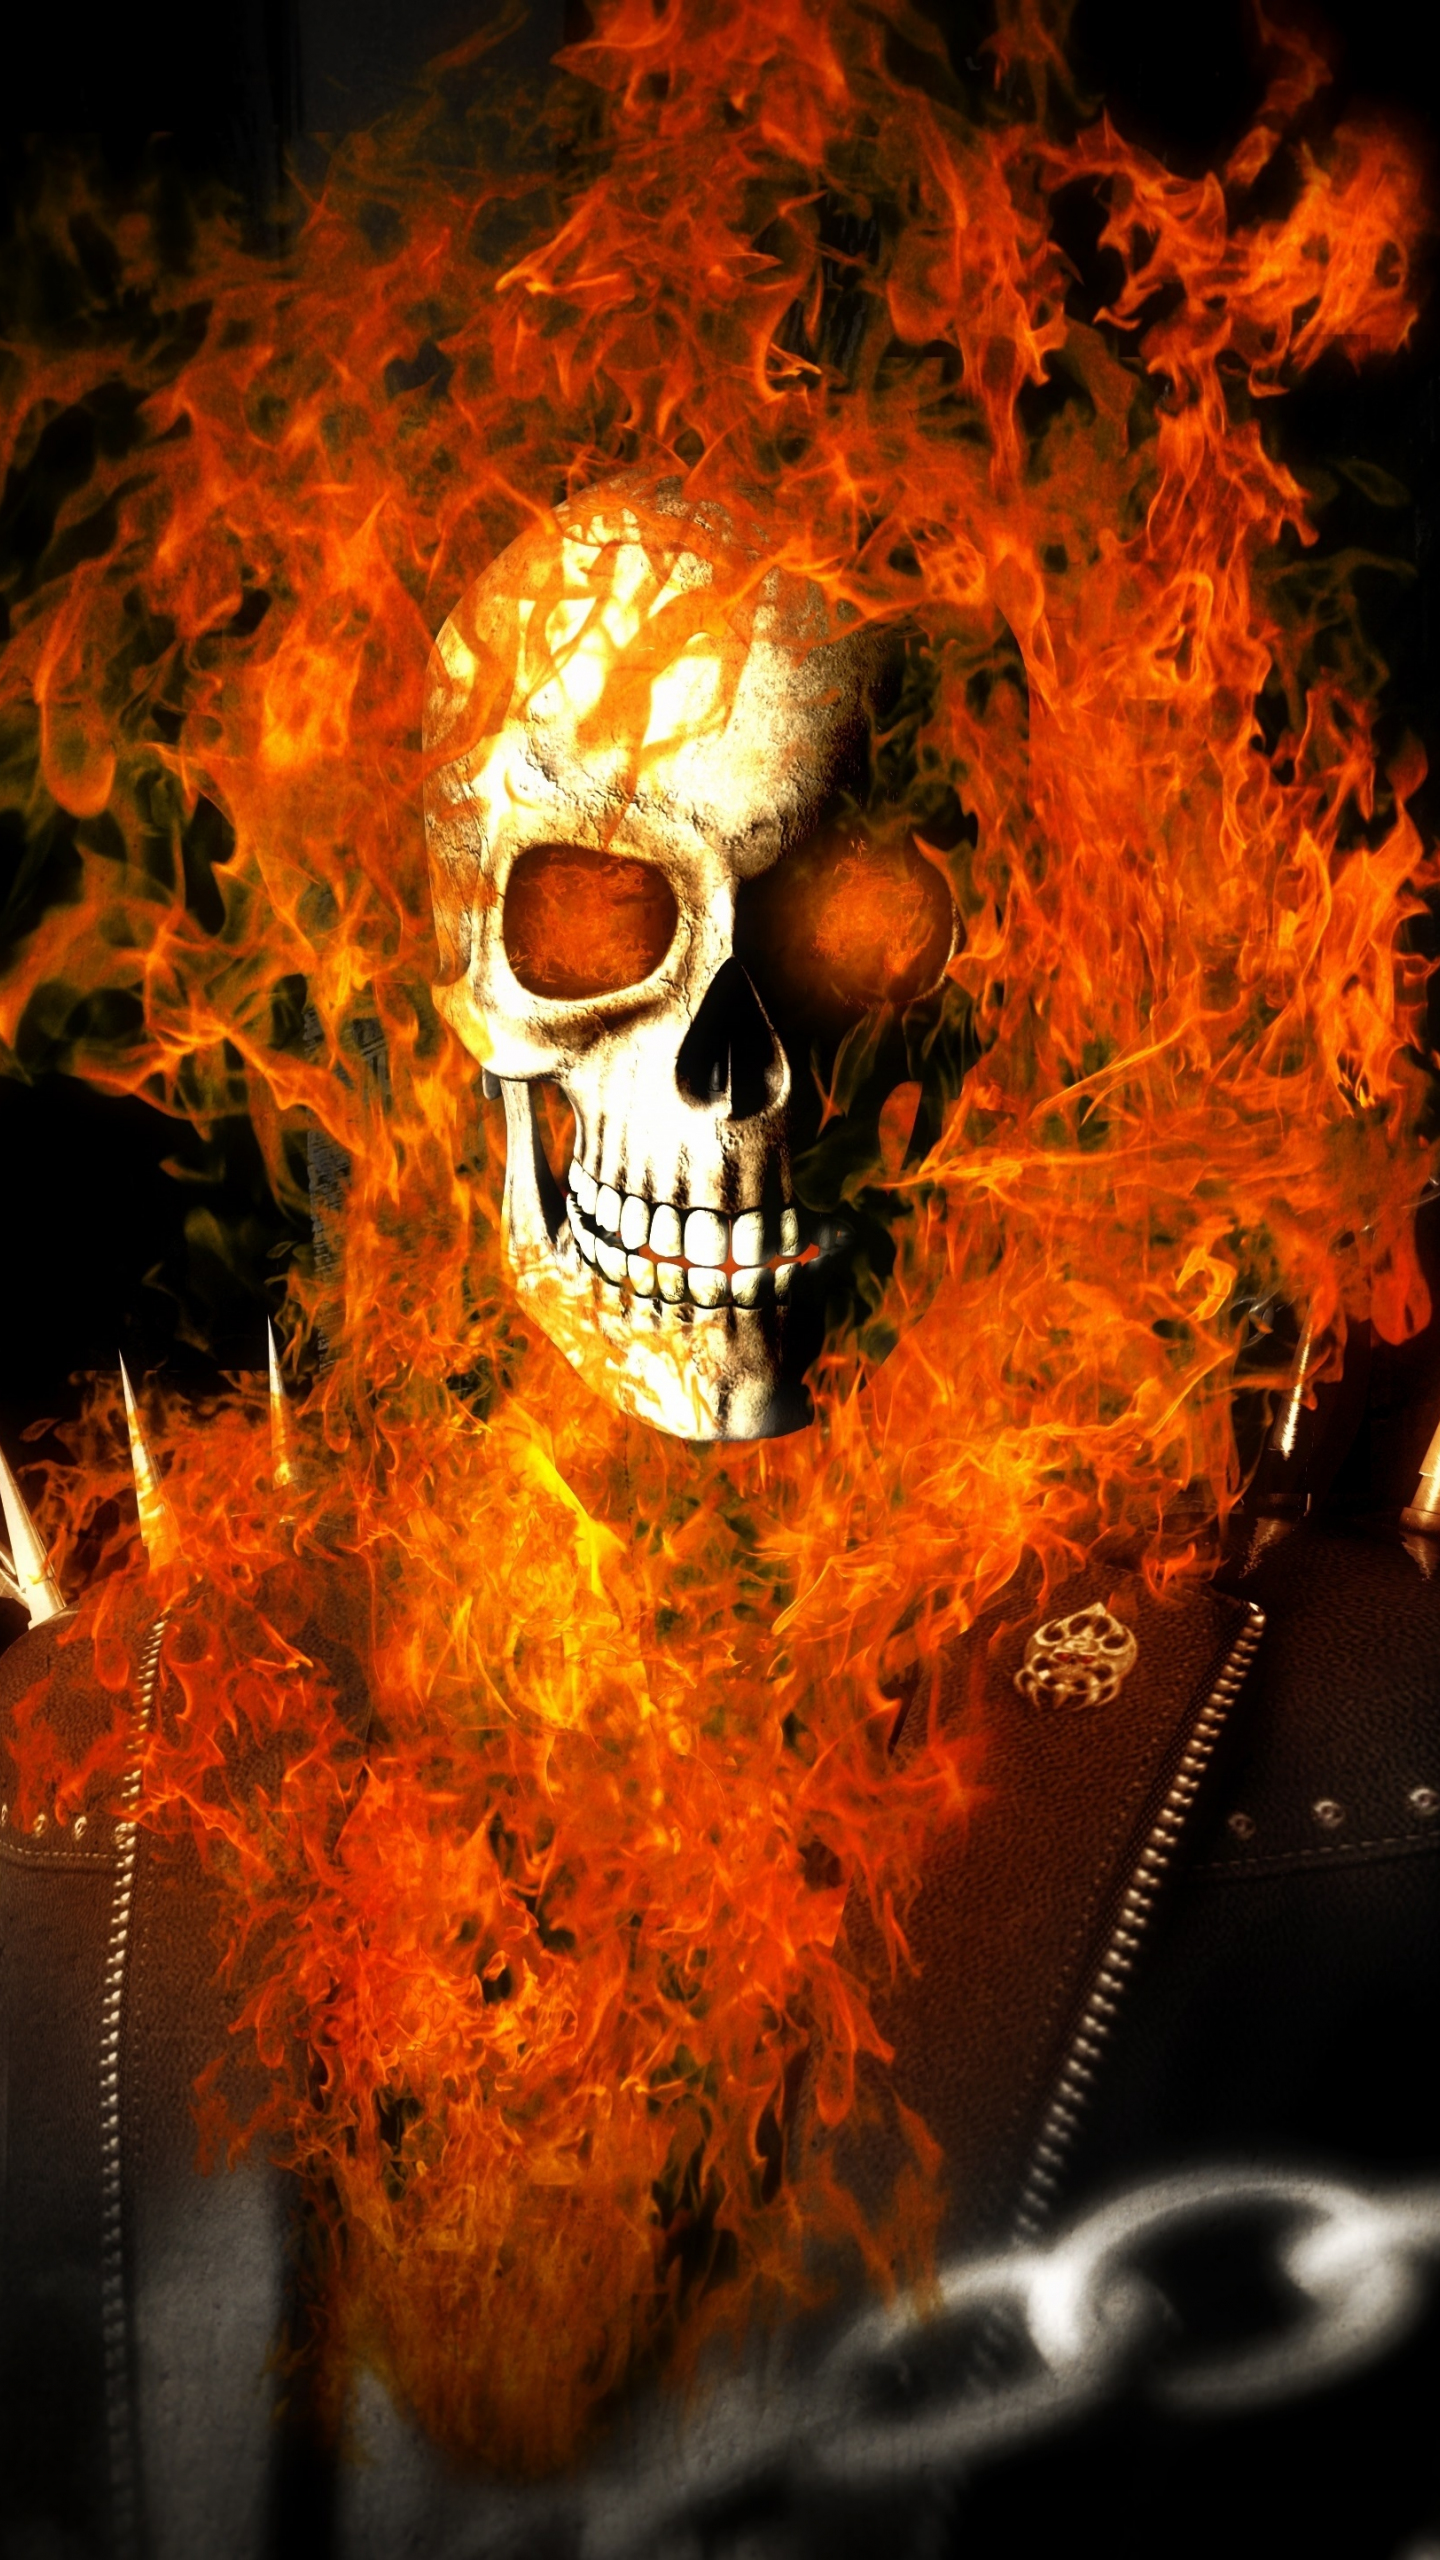 Download wallpaper 1440x2560 skull and fire, ghost rider, superhero, qhd  samsung galaxy s6, s7, edge, note, lg g4, 1440x2560 hd background, 16492